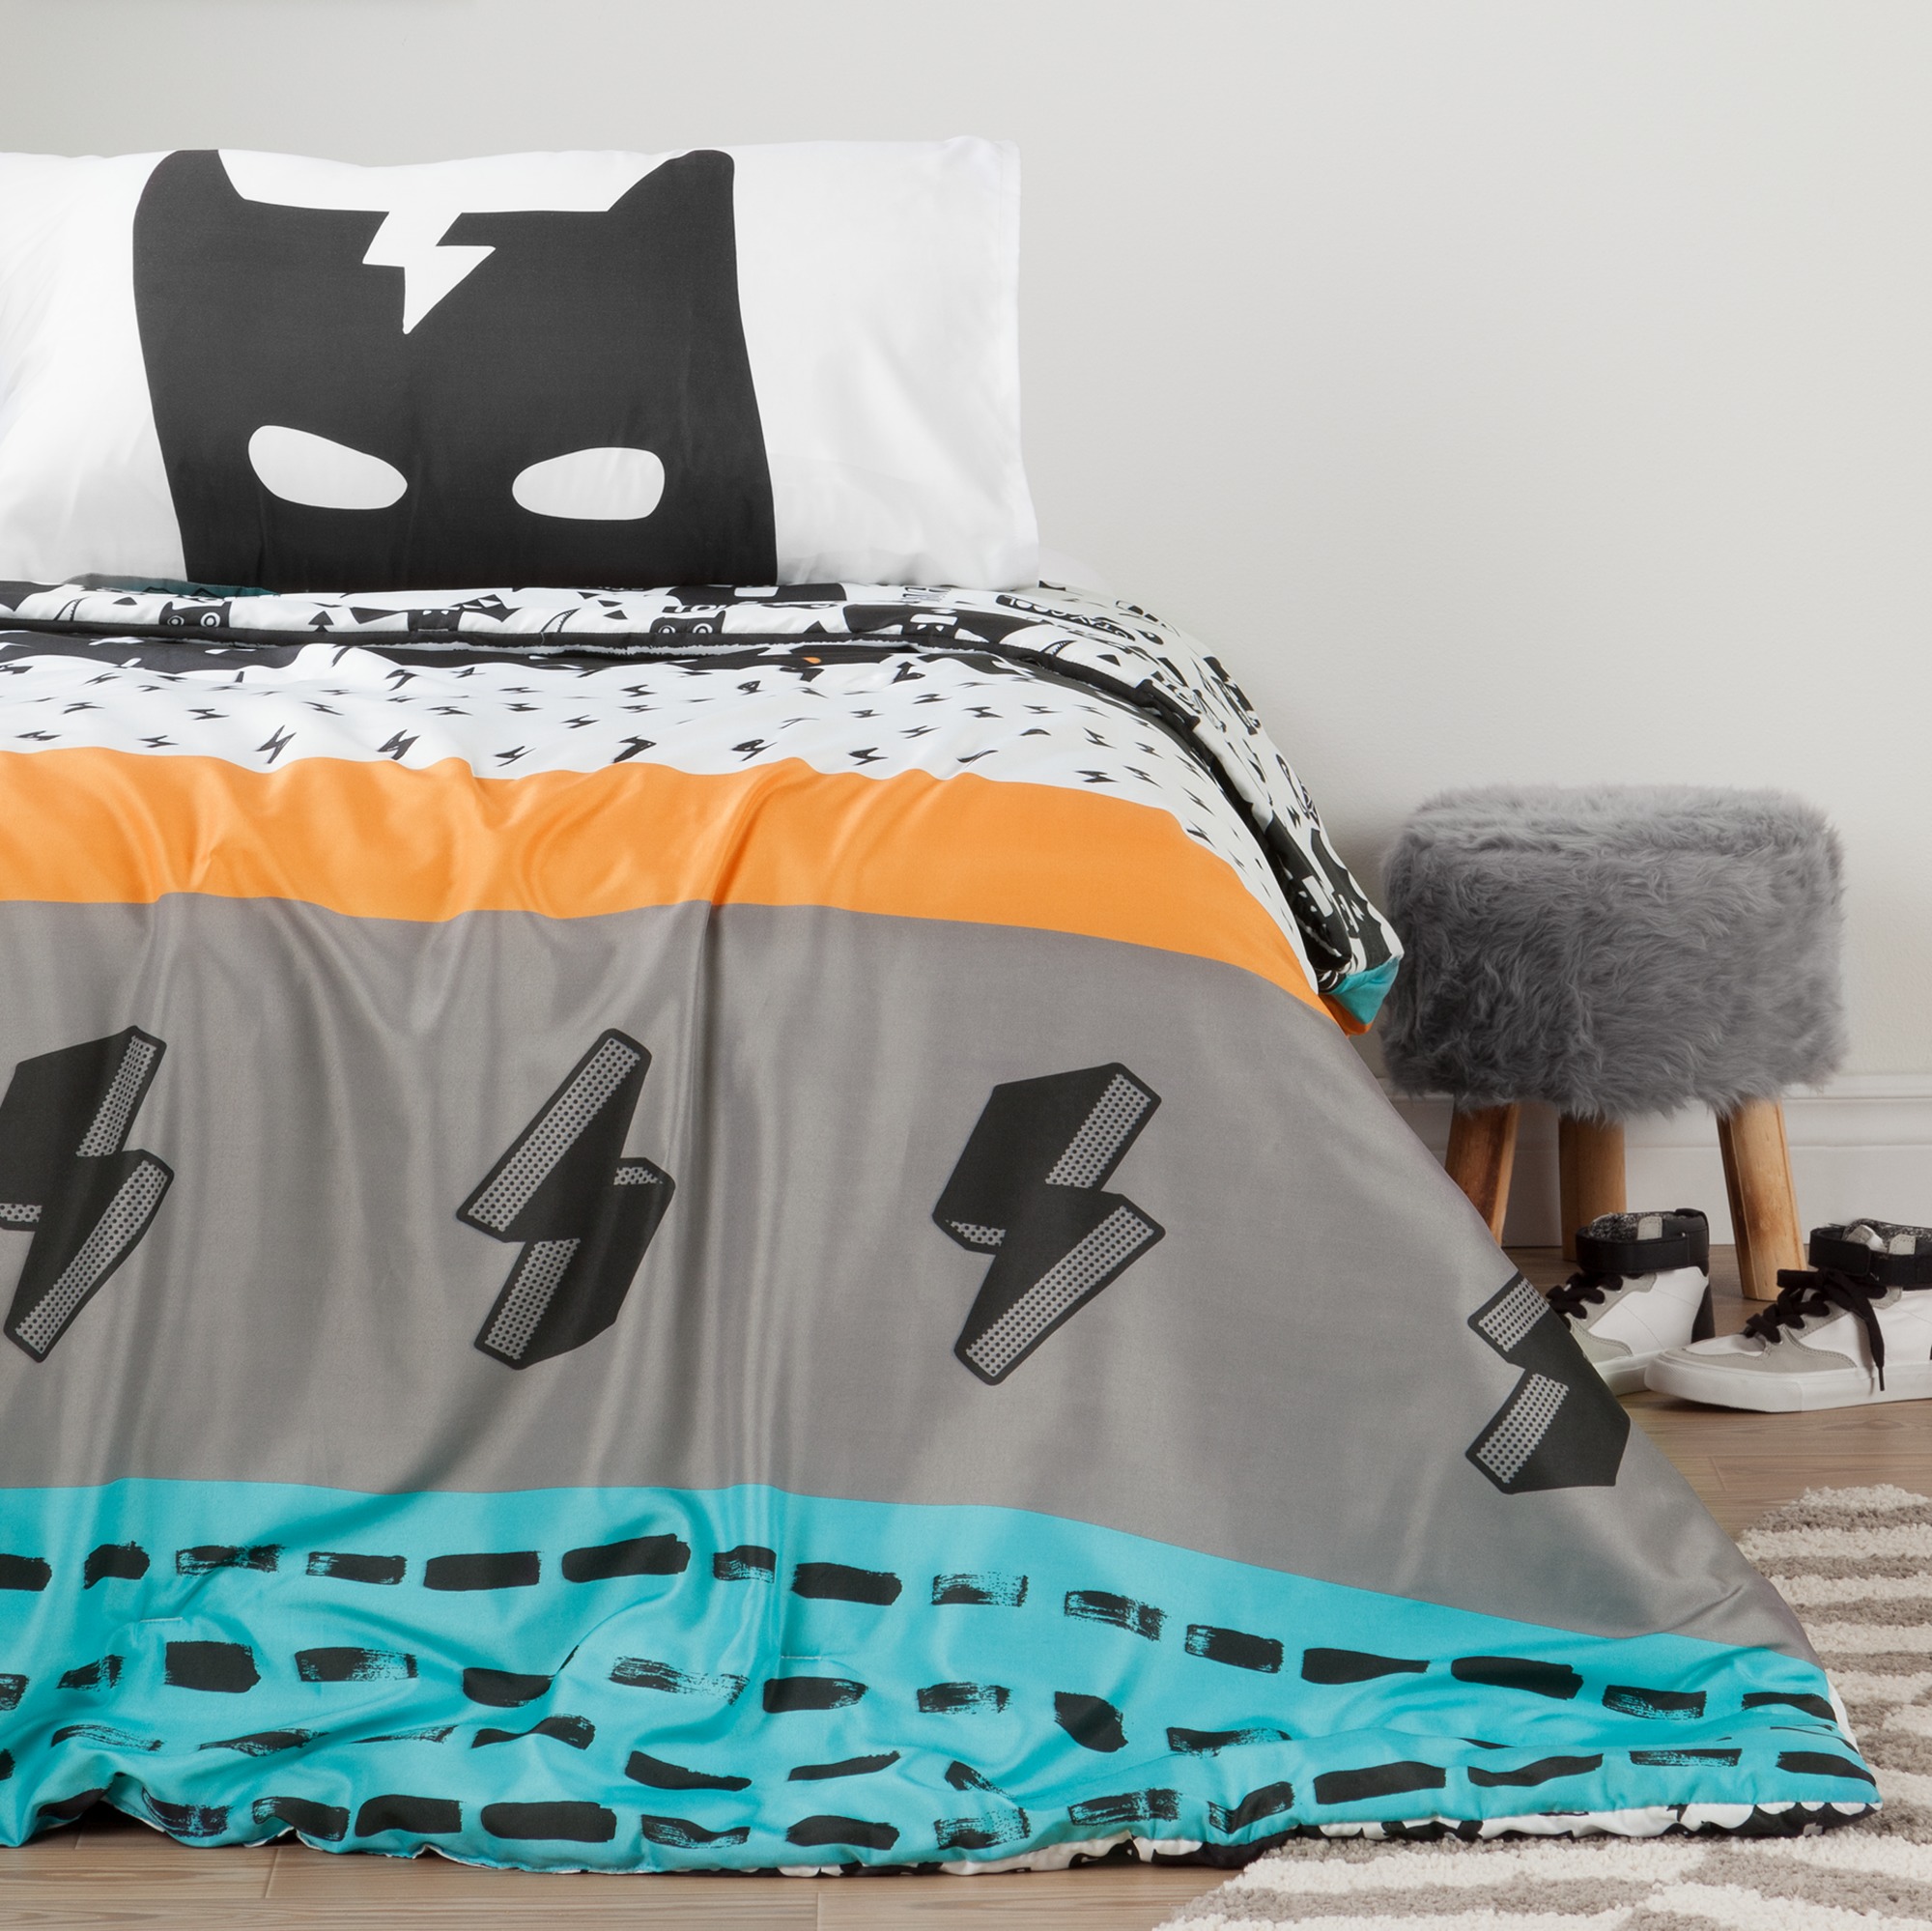 South Shore DreamIt Superheroes Comforter and Pillowcases- Black and White